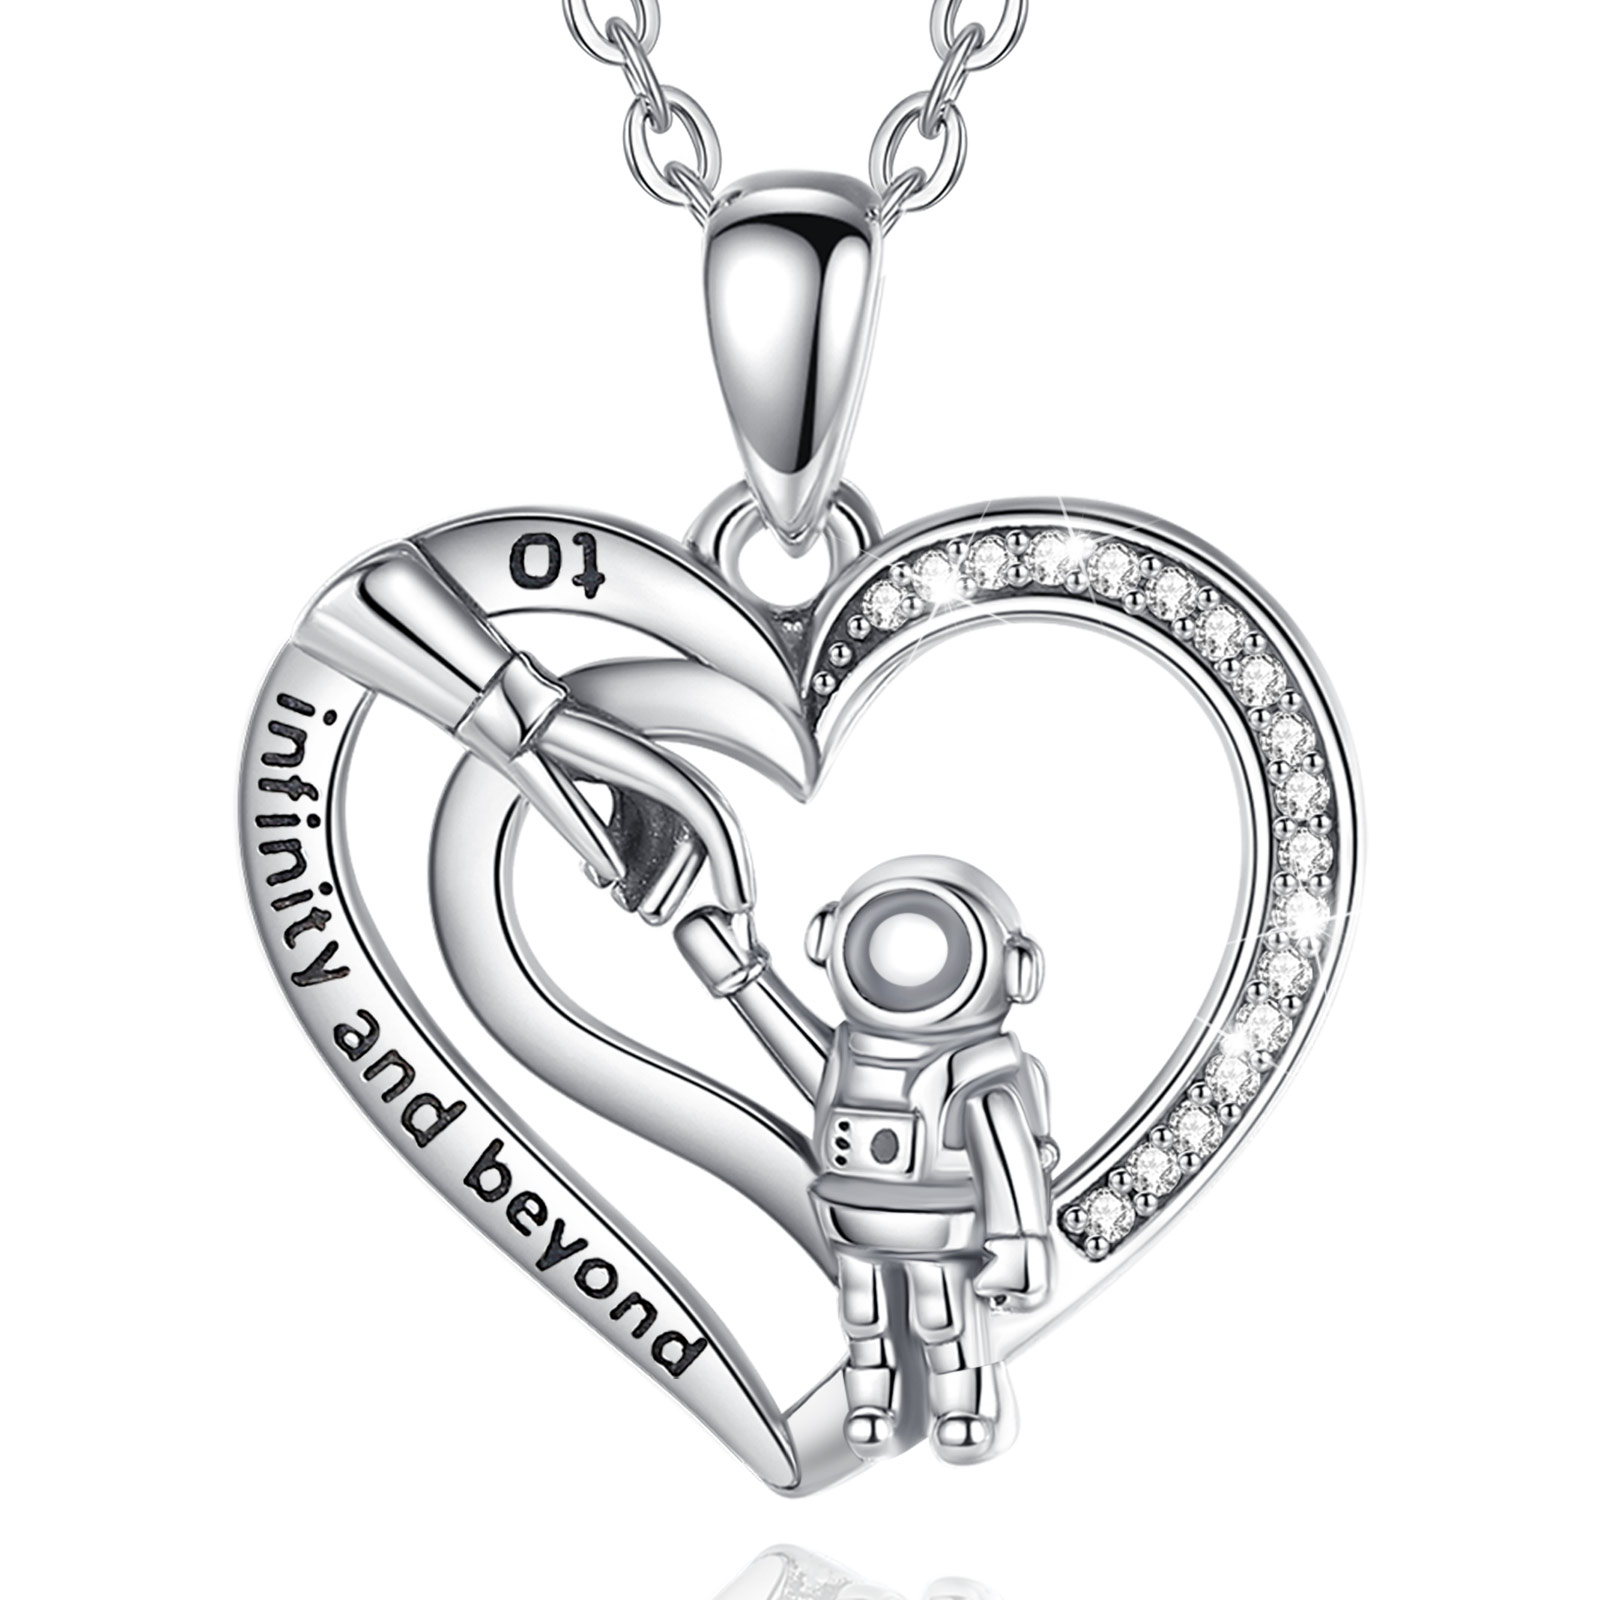 Merryshine Astronaut Series 925 Sterling Silver Heart Shaped Necklace for Friend Gift